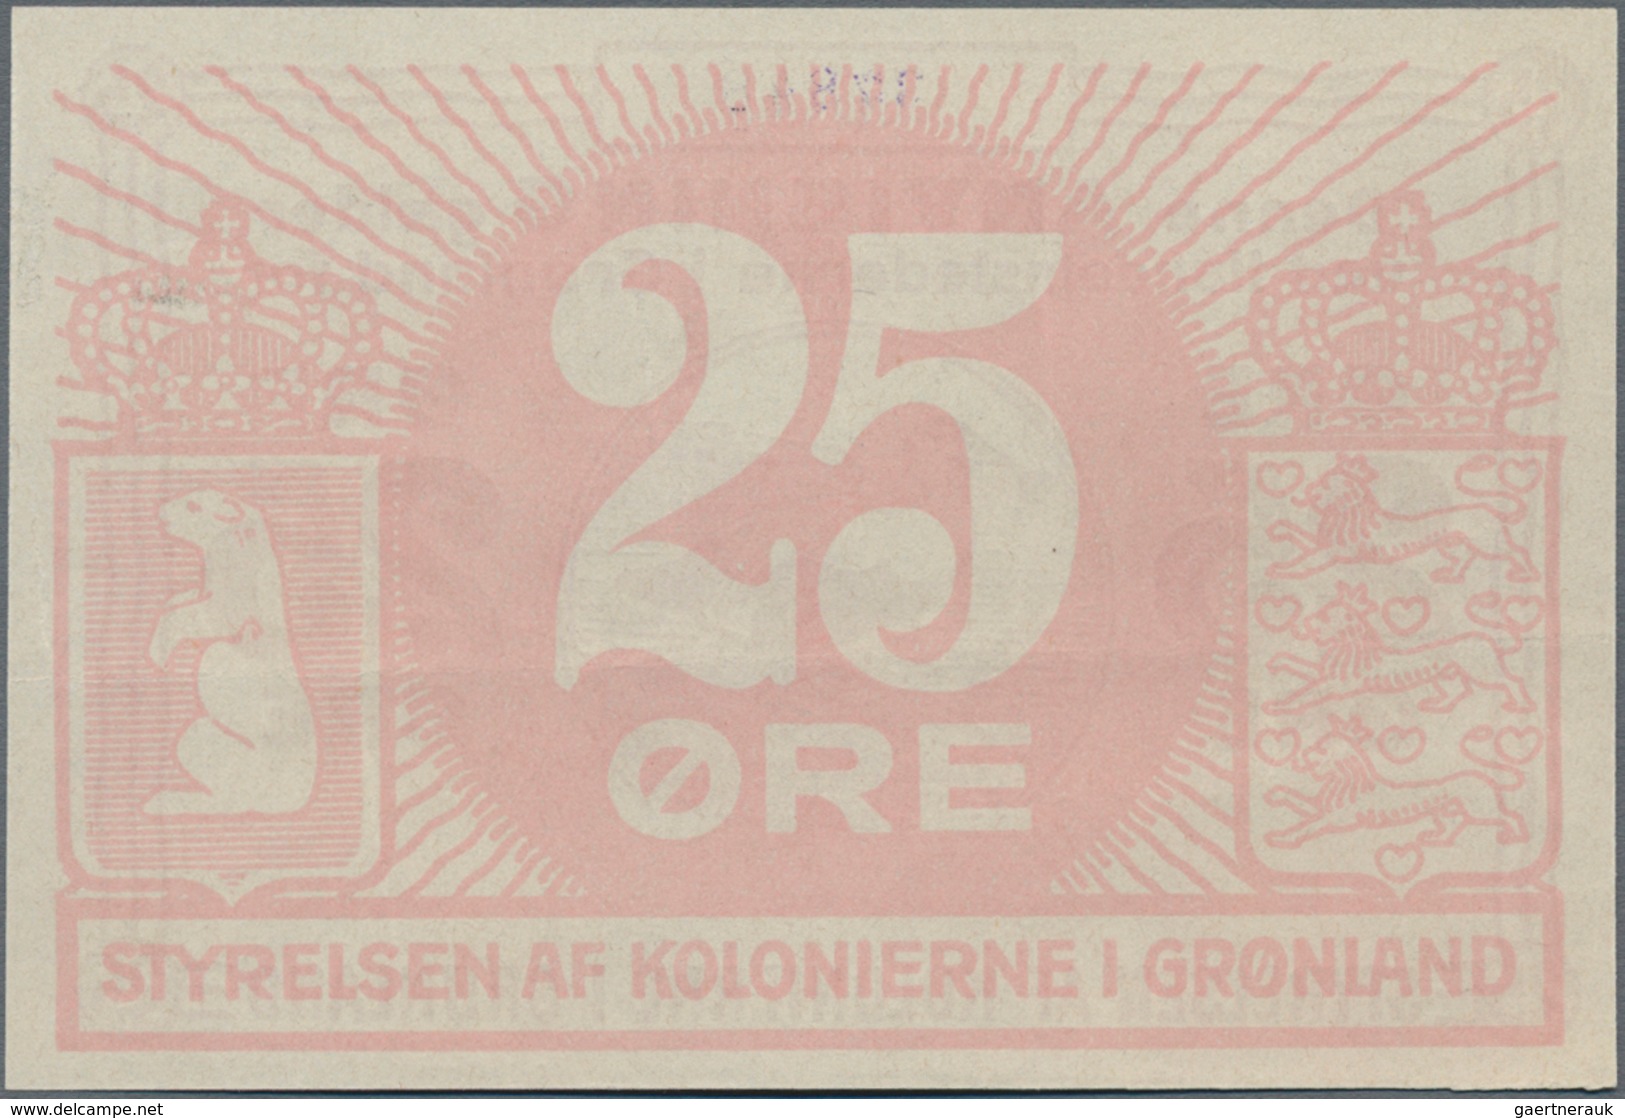 Greenland / Grönland: 25 Oere ND(1923) Unsigned Remainder, P.11r, Almost Perfect Condition With A Ve - Grönland